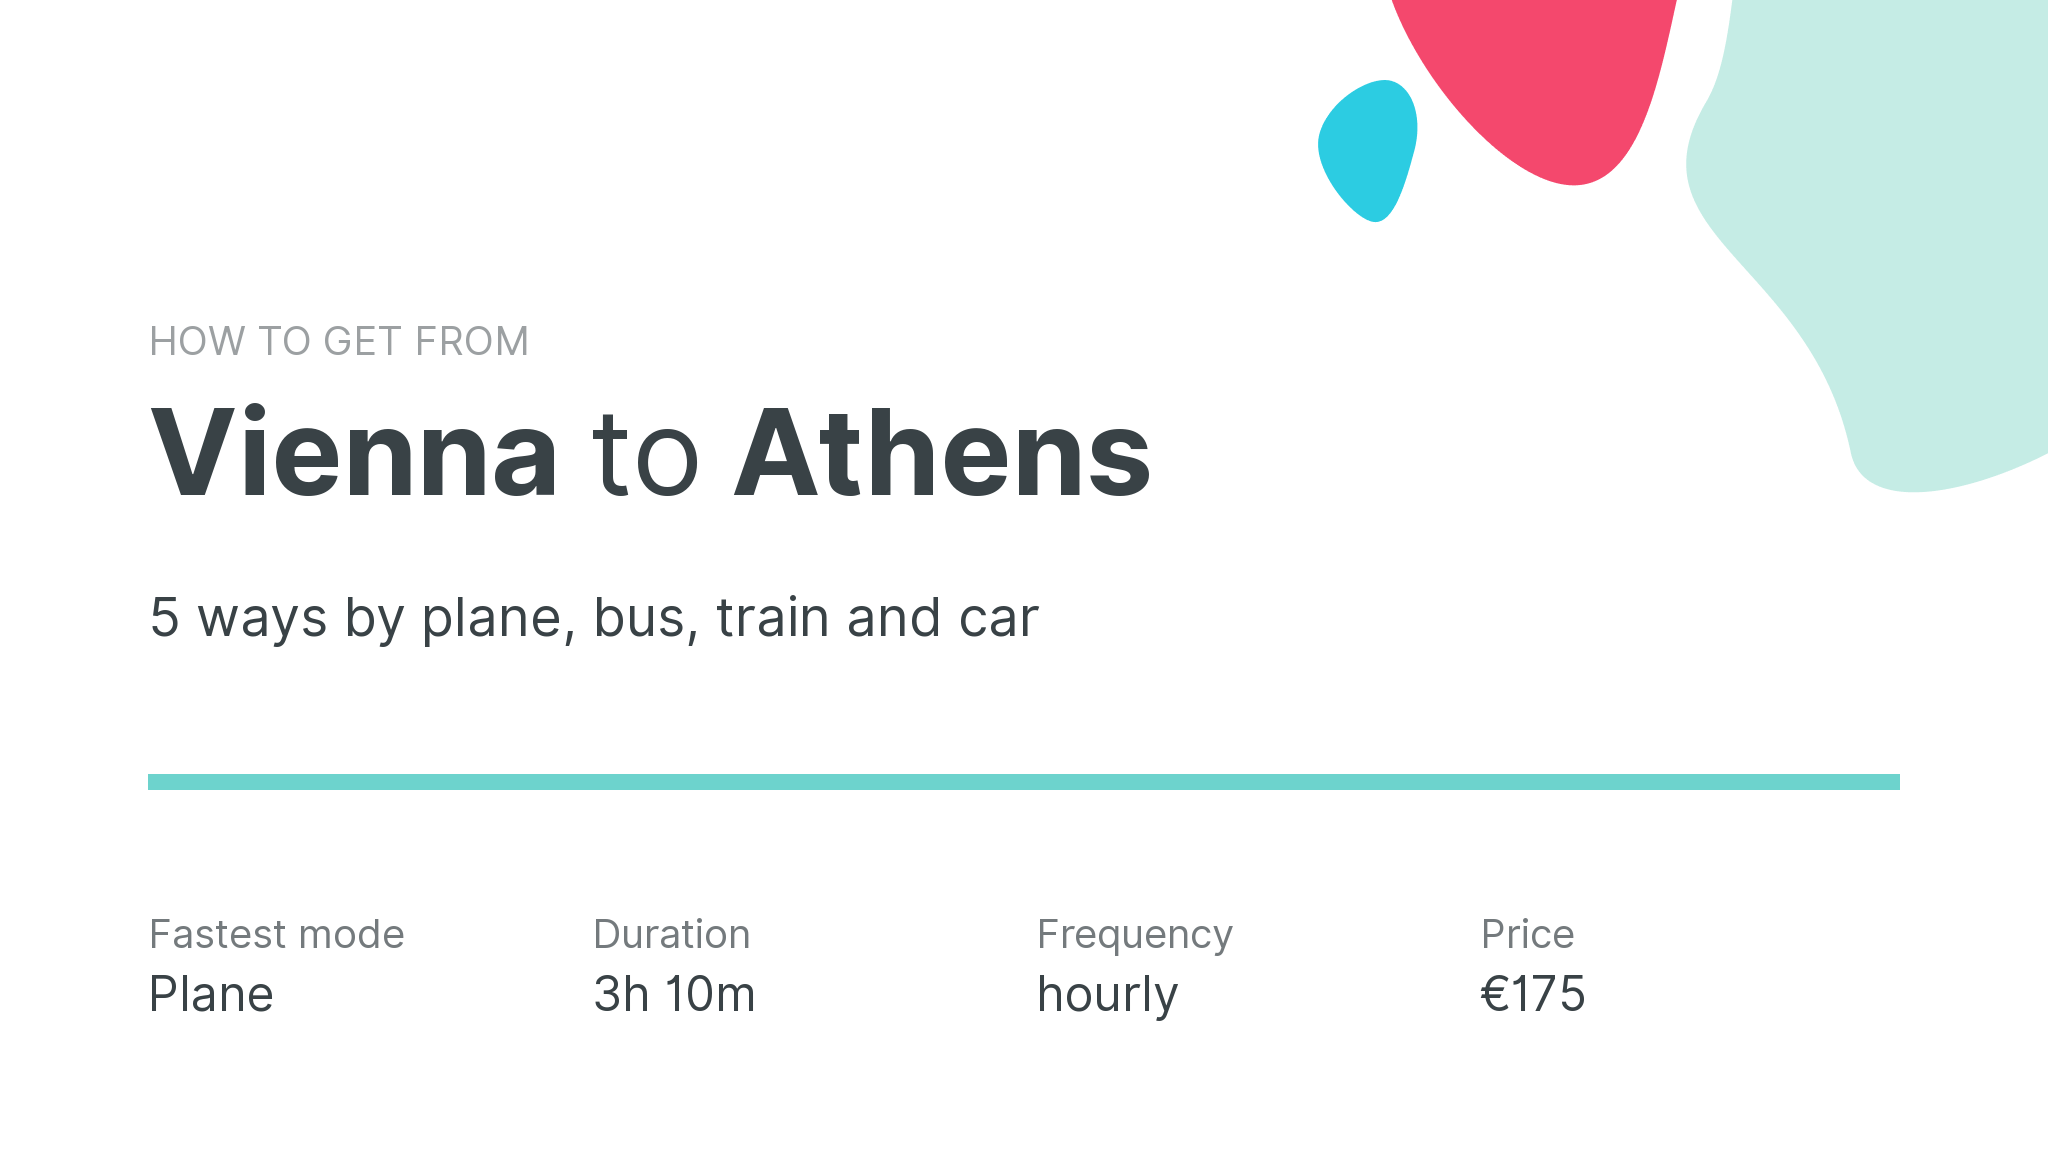 How do I get from Vienna to Athens